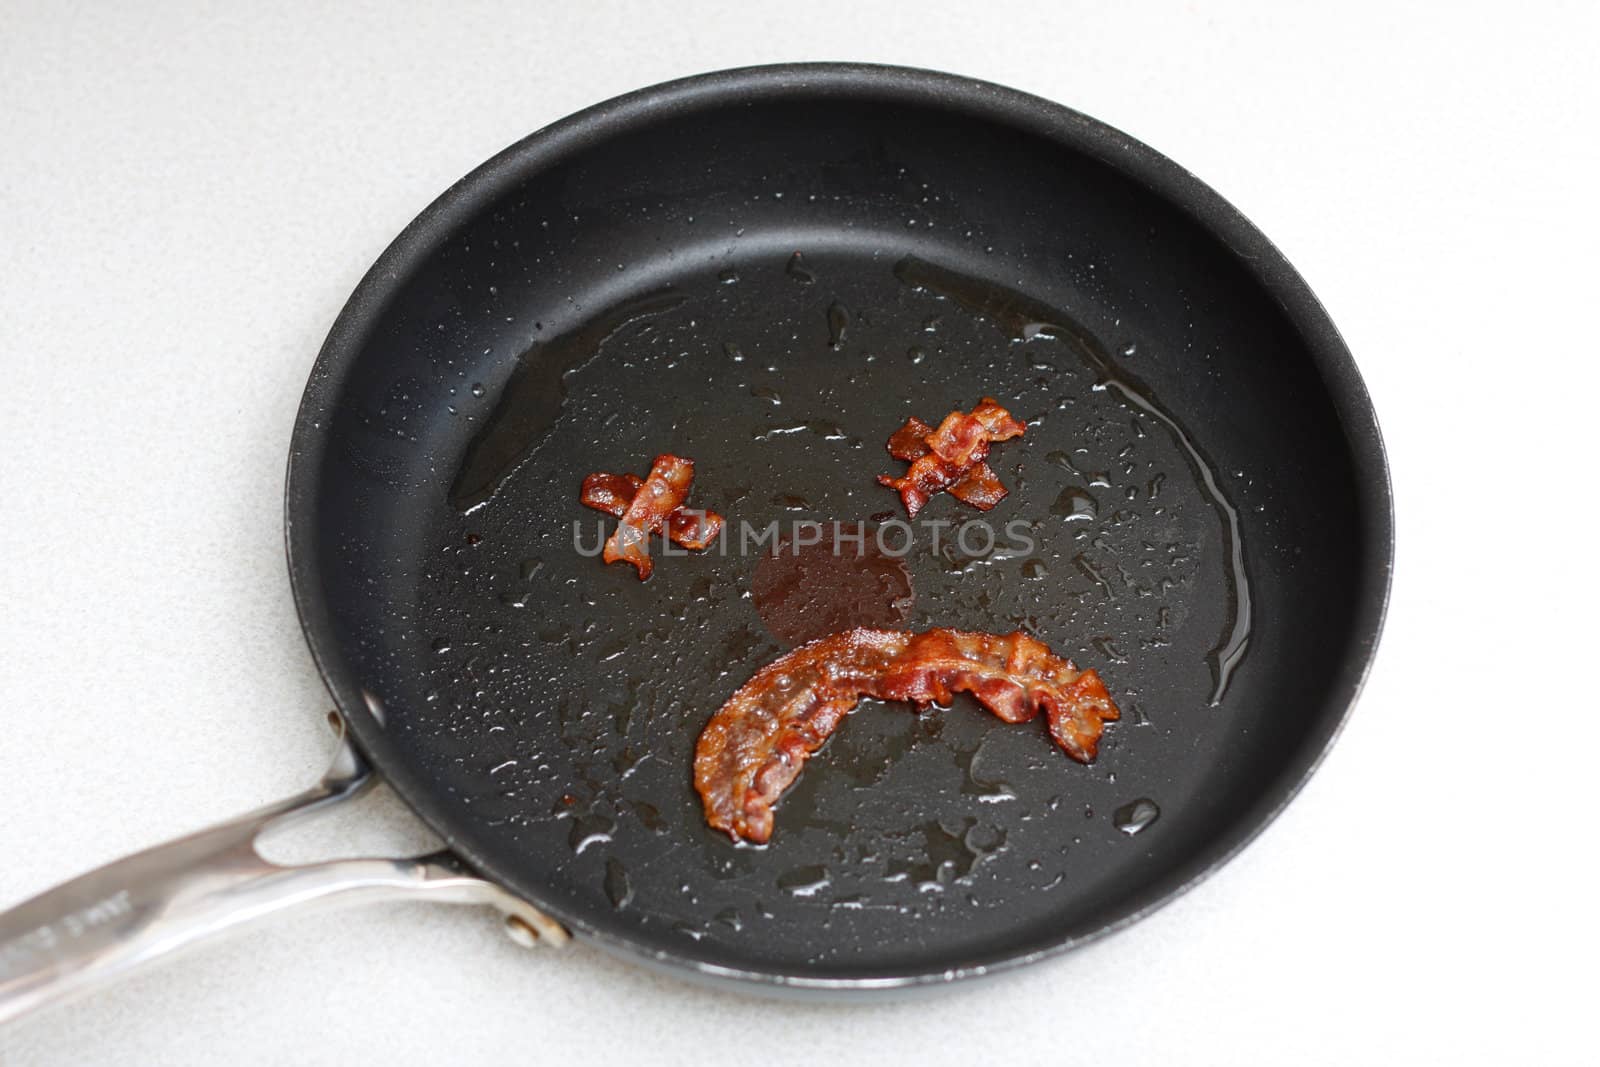 Smiley made out of bacon illustrating dangerous eating habits